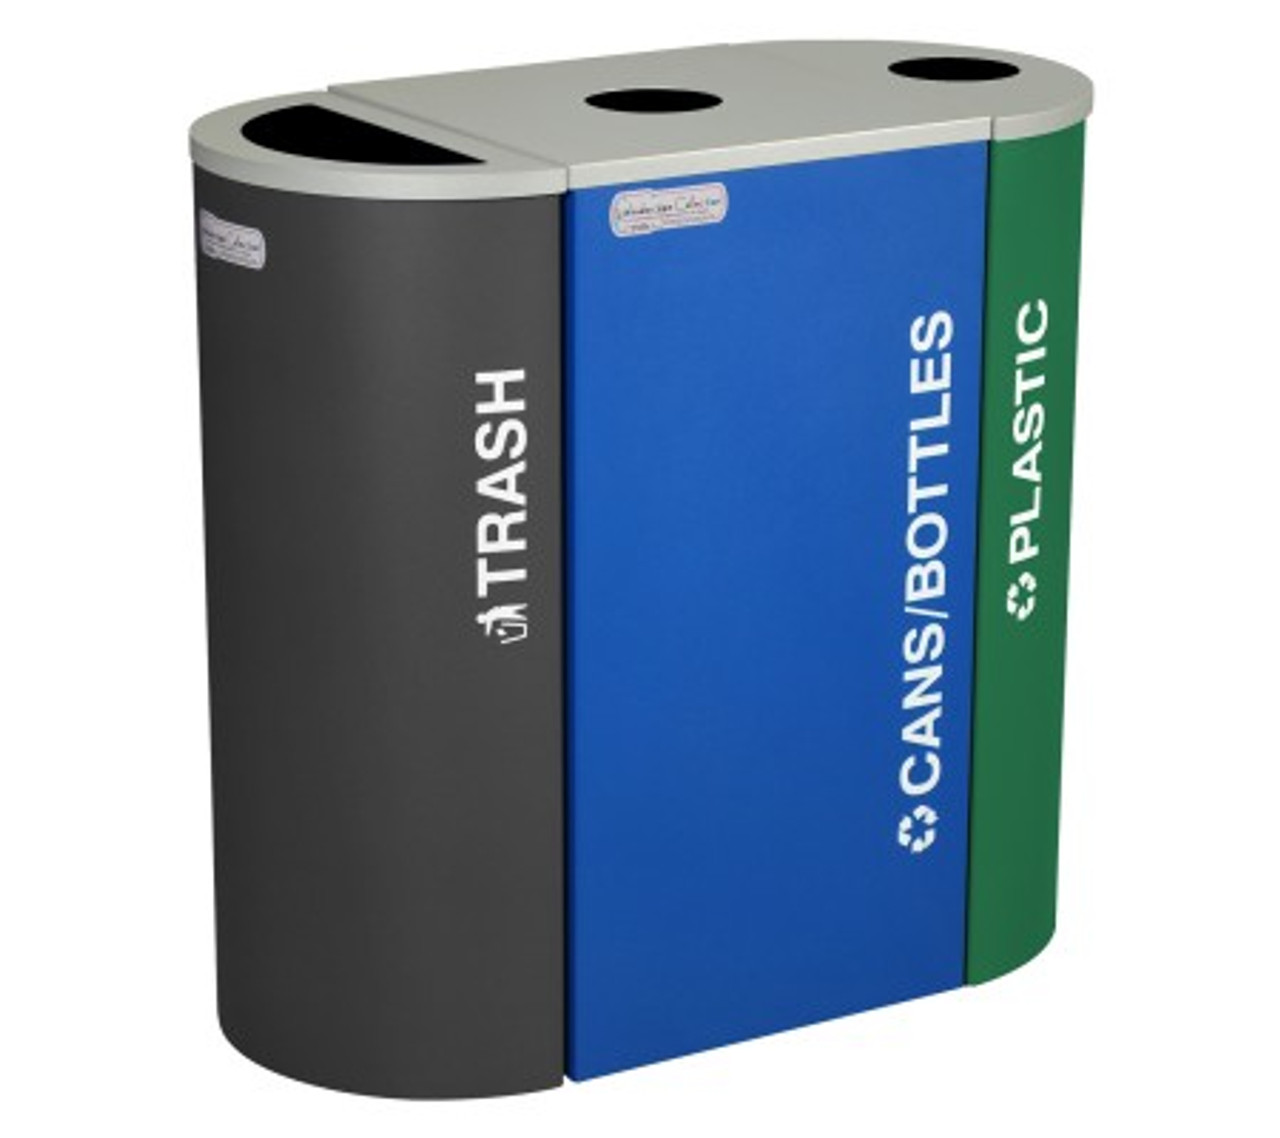 dual trash can and recycle bin